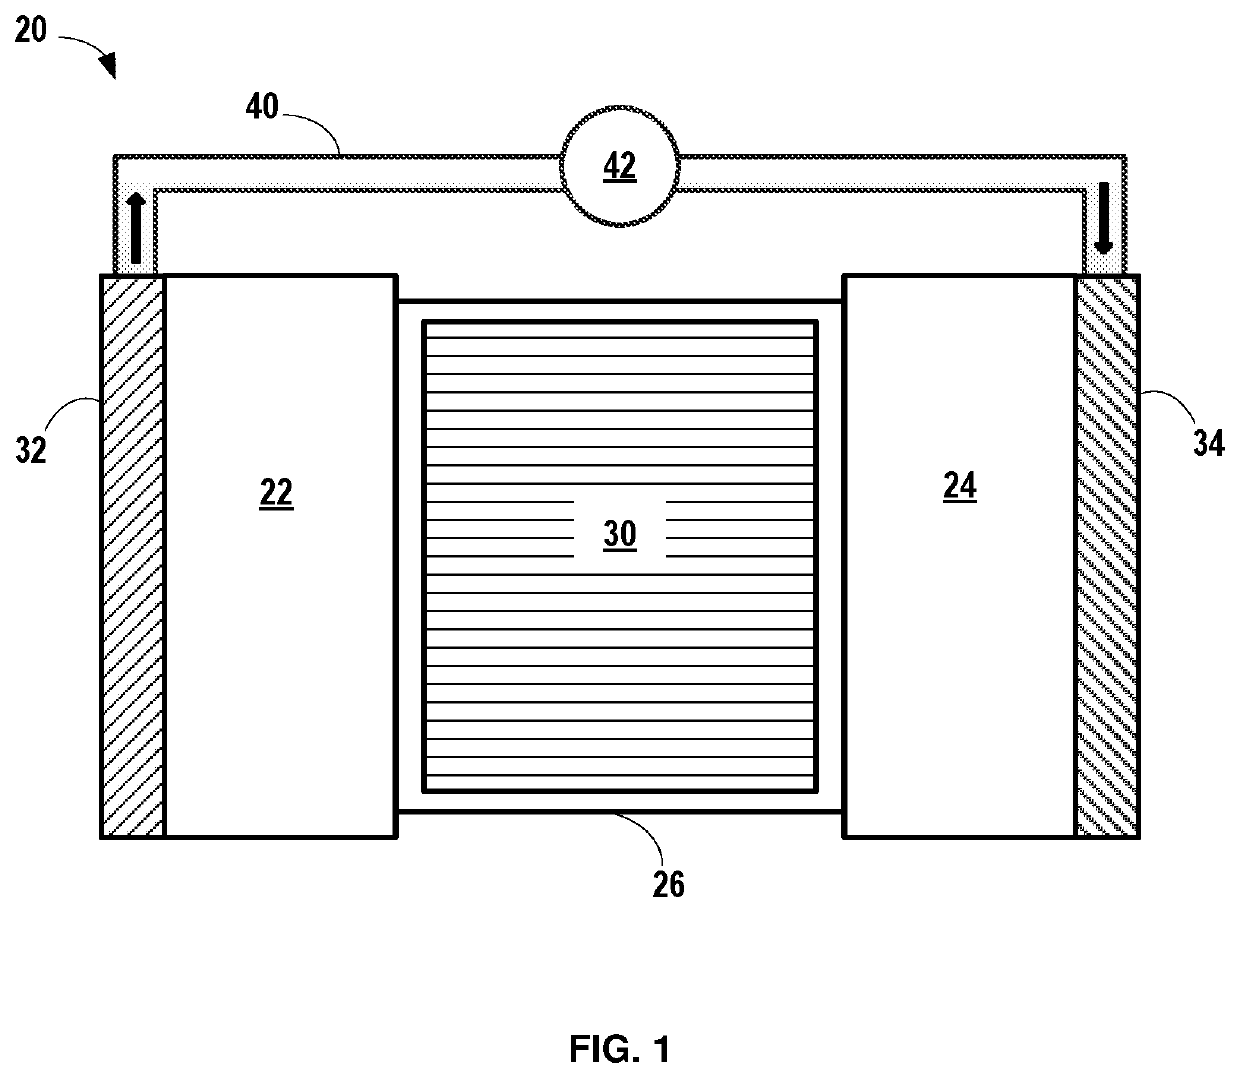 Electrolyte system for silicon-containing electrodes